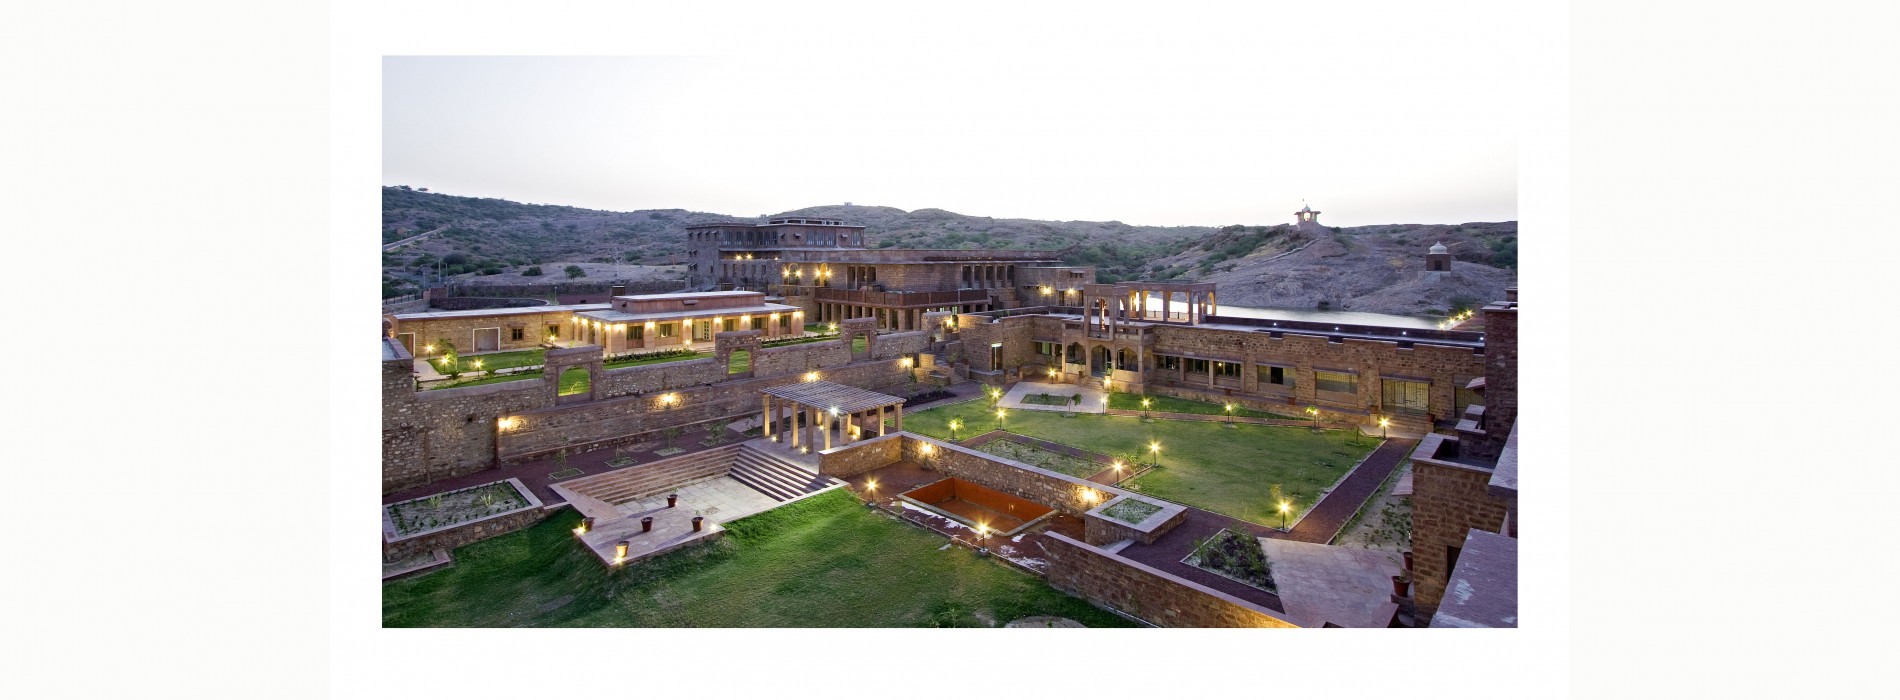 Inde Hotels adds acclaimed heritage property to its portfolio